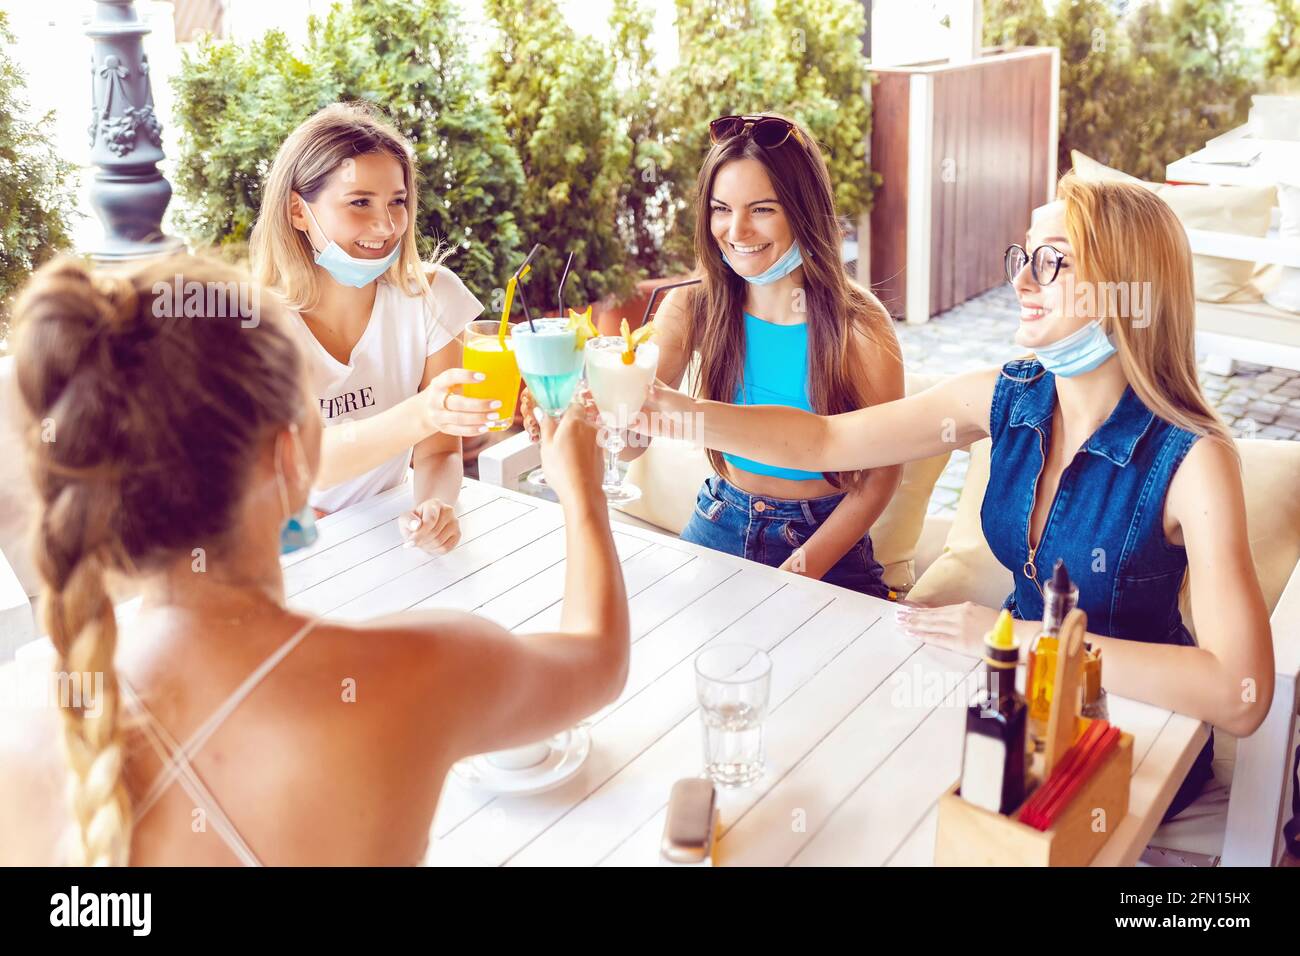 Happy young women friends with open face masks drinking cocktails at pub Stock Photo